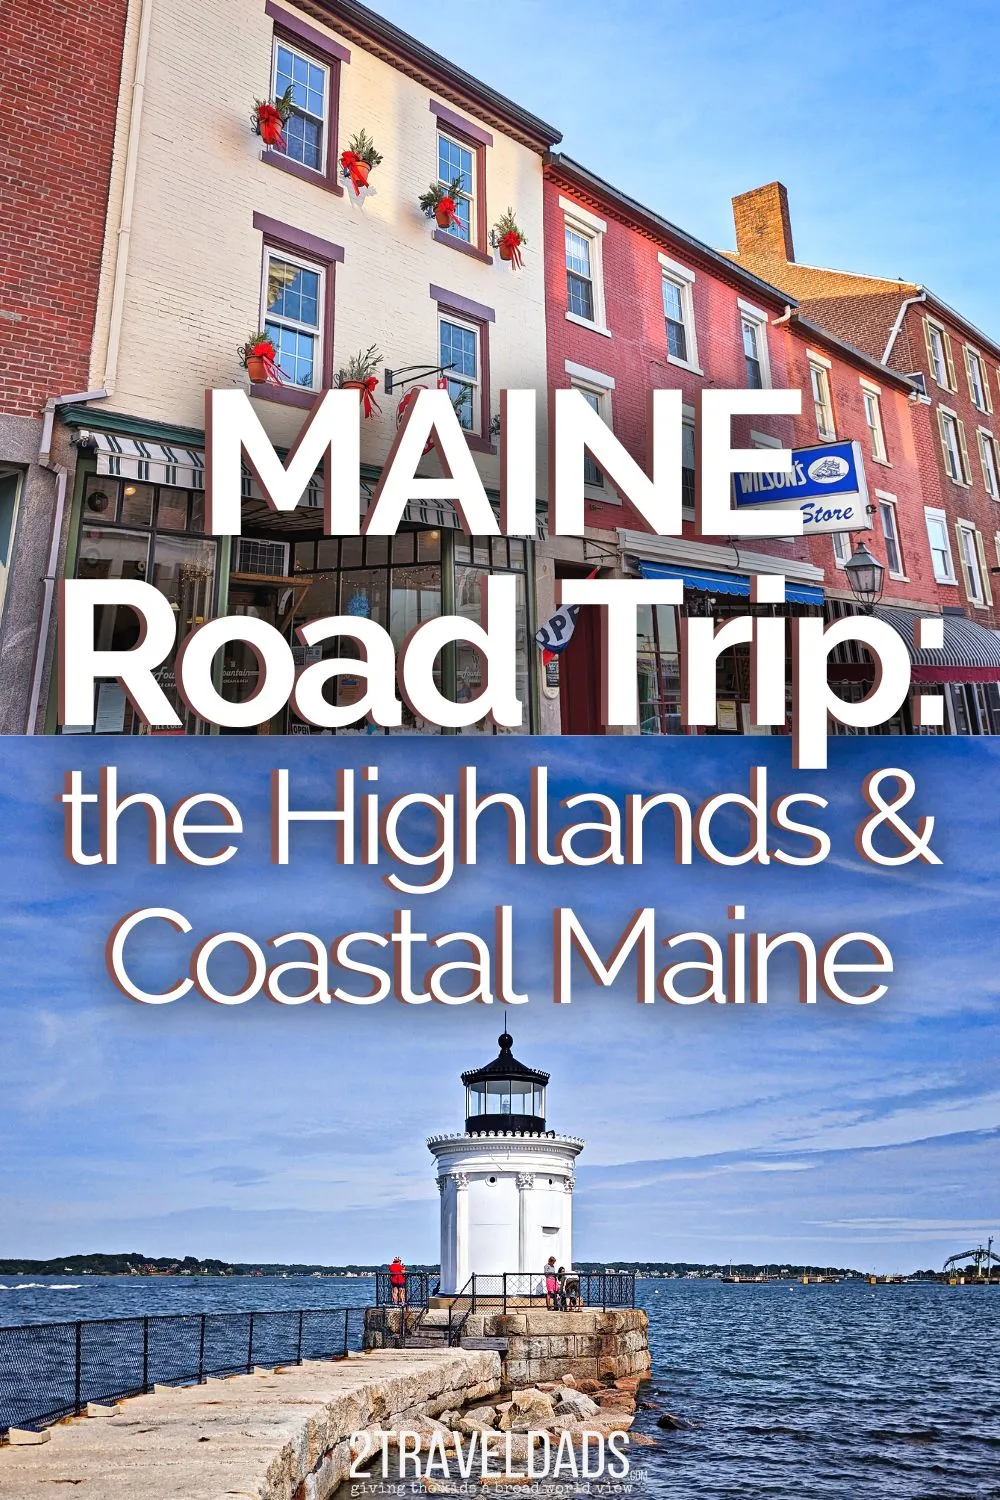 Maine in summer is the perfect time for a road trip. This fun Maine road trip goes from Portland to the Highlands to Acadia National Park and the lobster towns of MidCoast Maine. Great trip with kids or on your own!